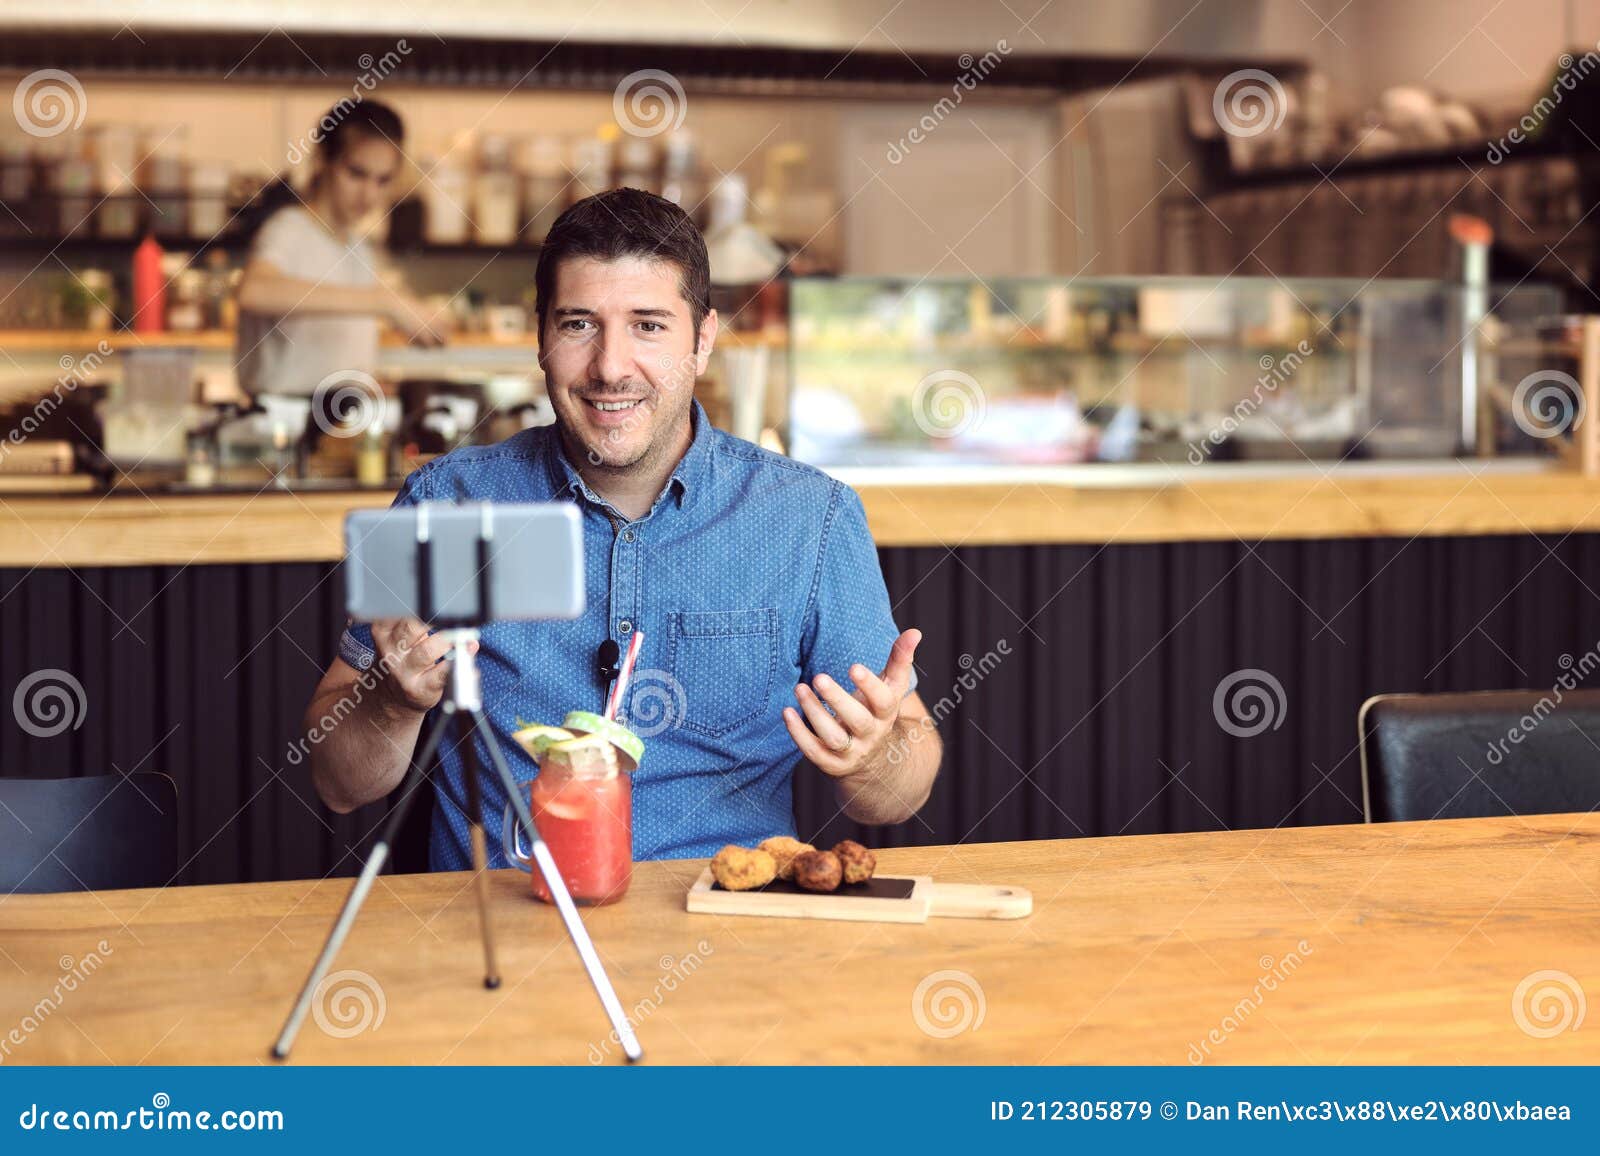 social media influencer or food blogger creating digital marketing content by filming video inside small business restaurant